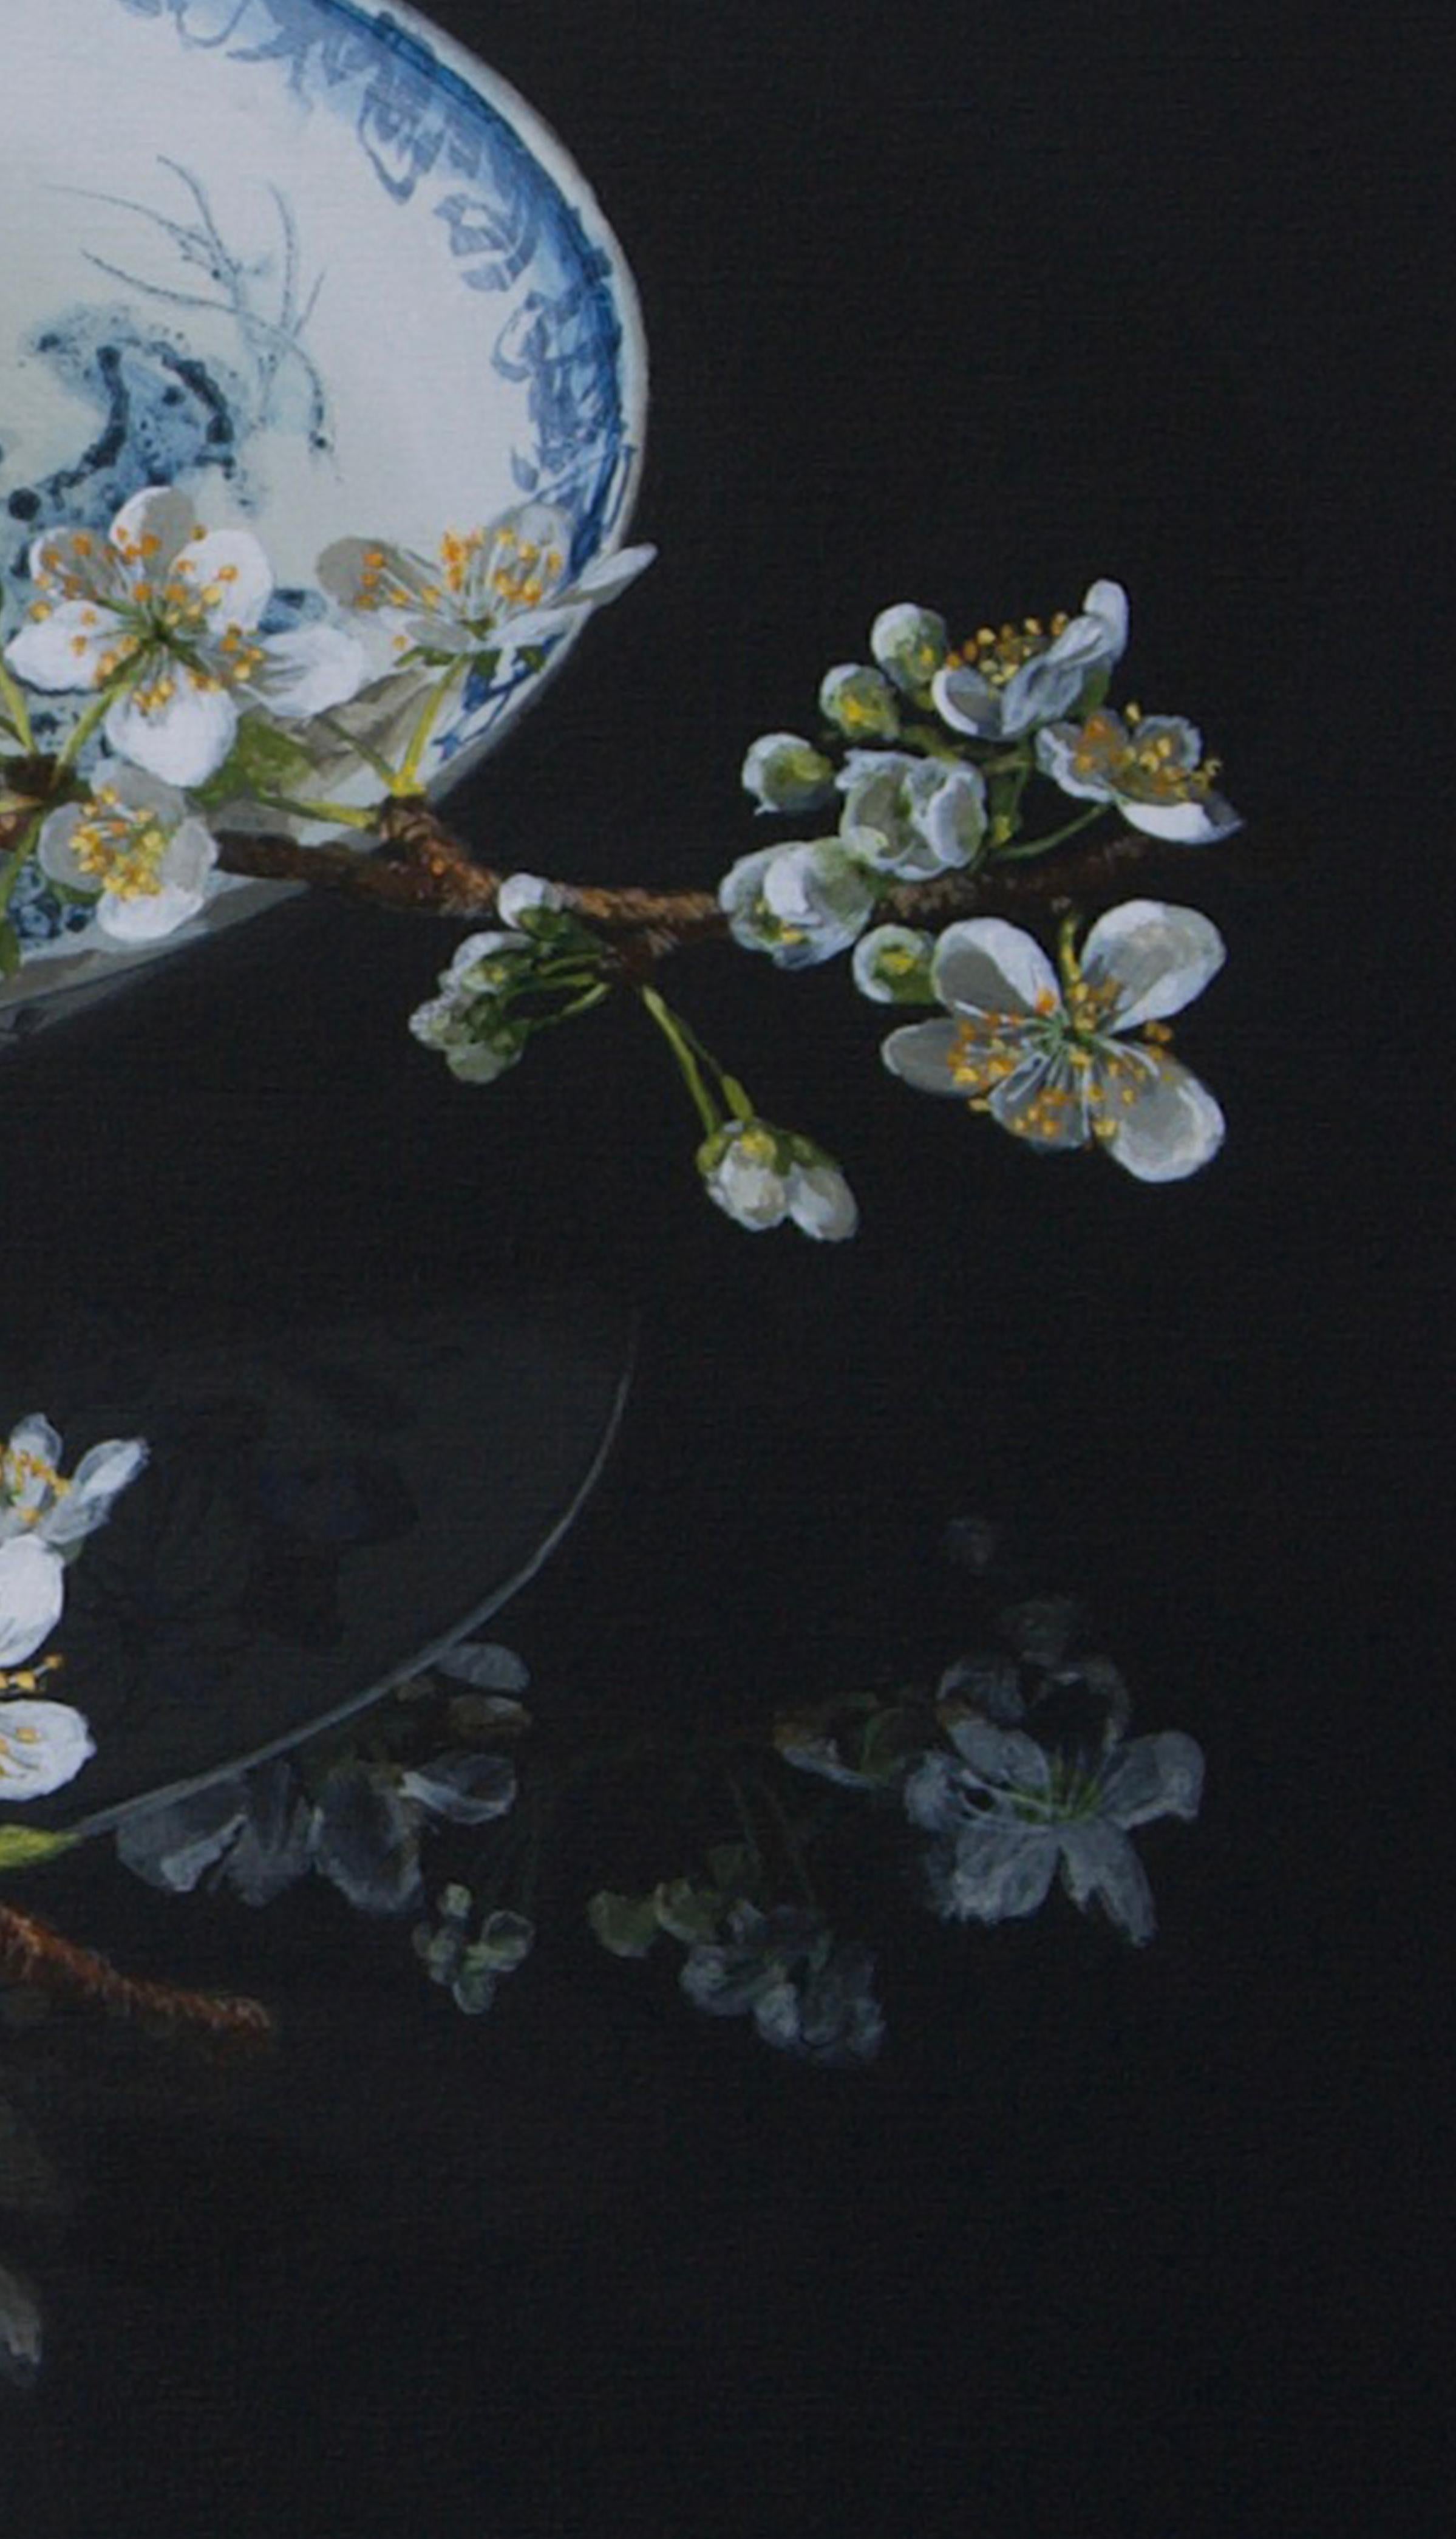 ''Pear Blossom'', Dutch Contemporary Still Life with Porcelain and White Blossom - Black Still-Life Painting by Sasja Wagenaar